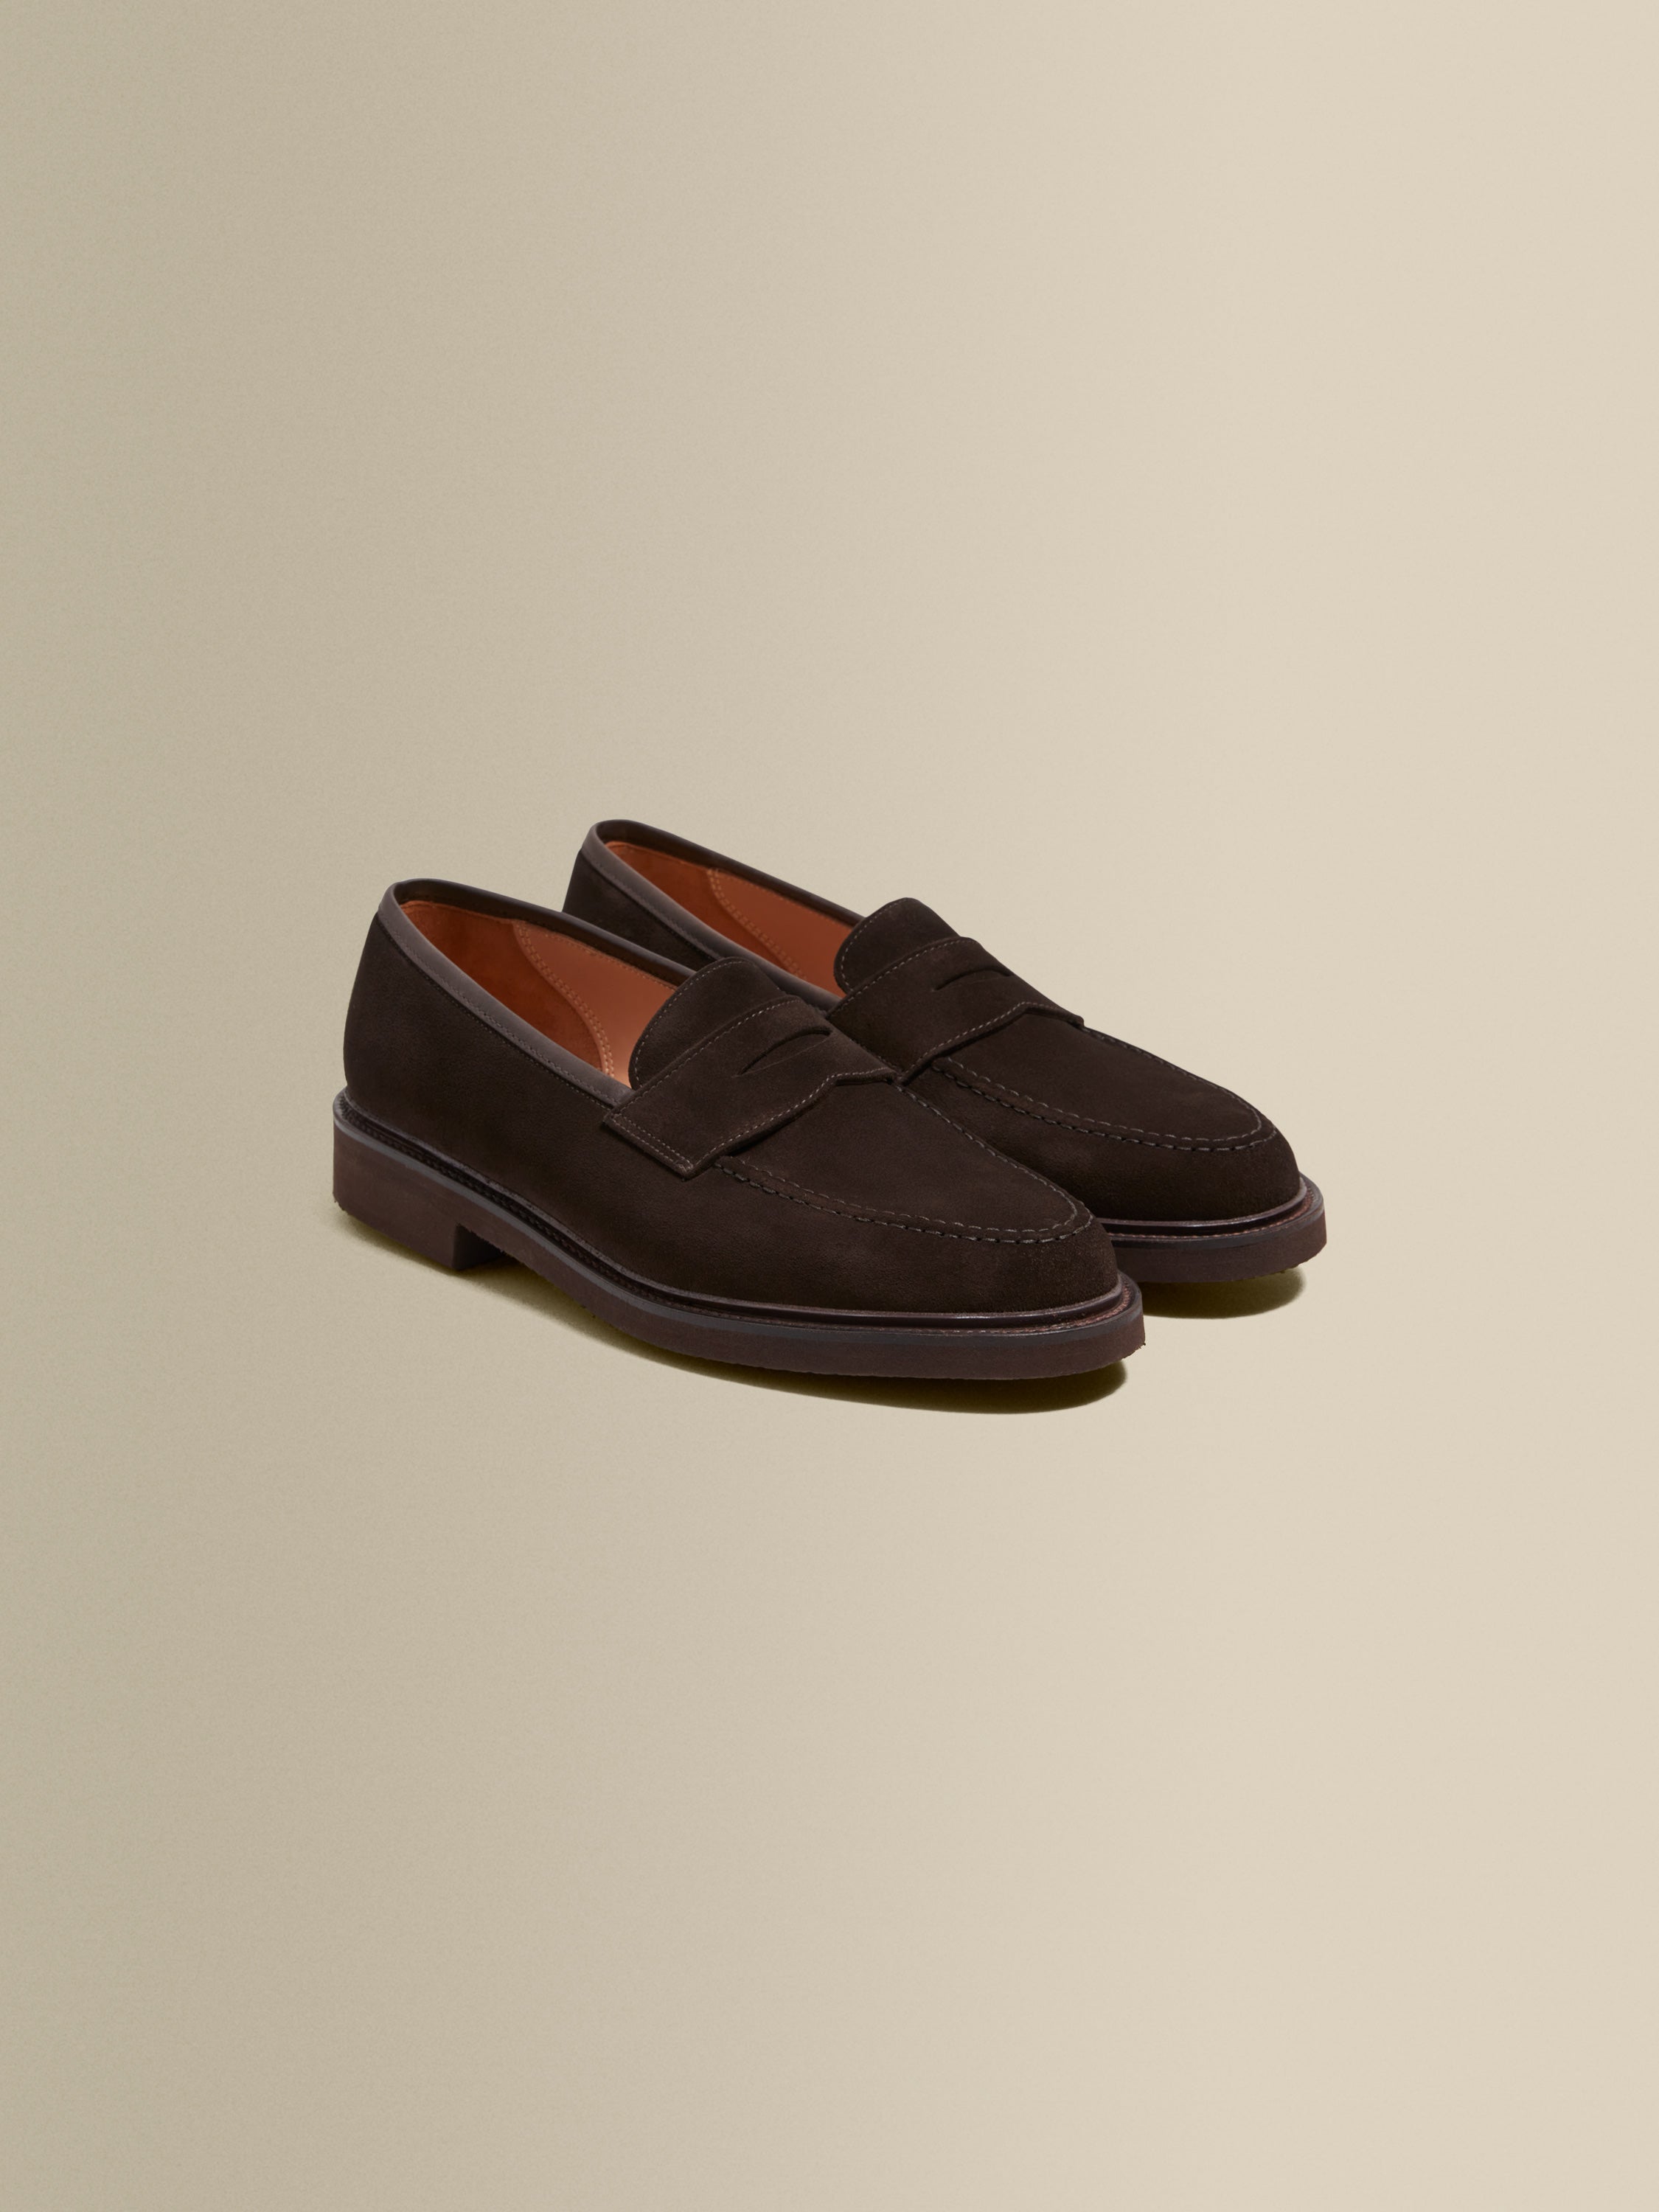 Calf Suede Penny Loafer Shoes Brown Product Image Pair